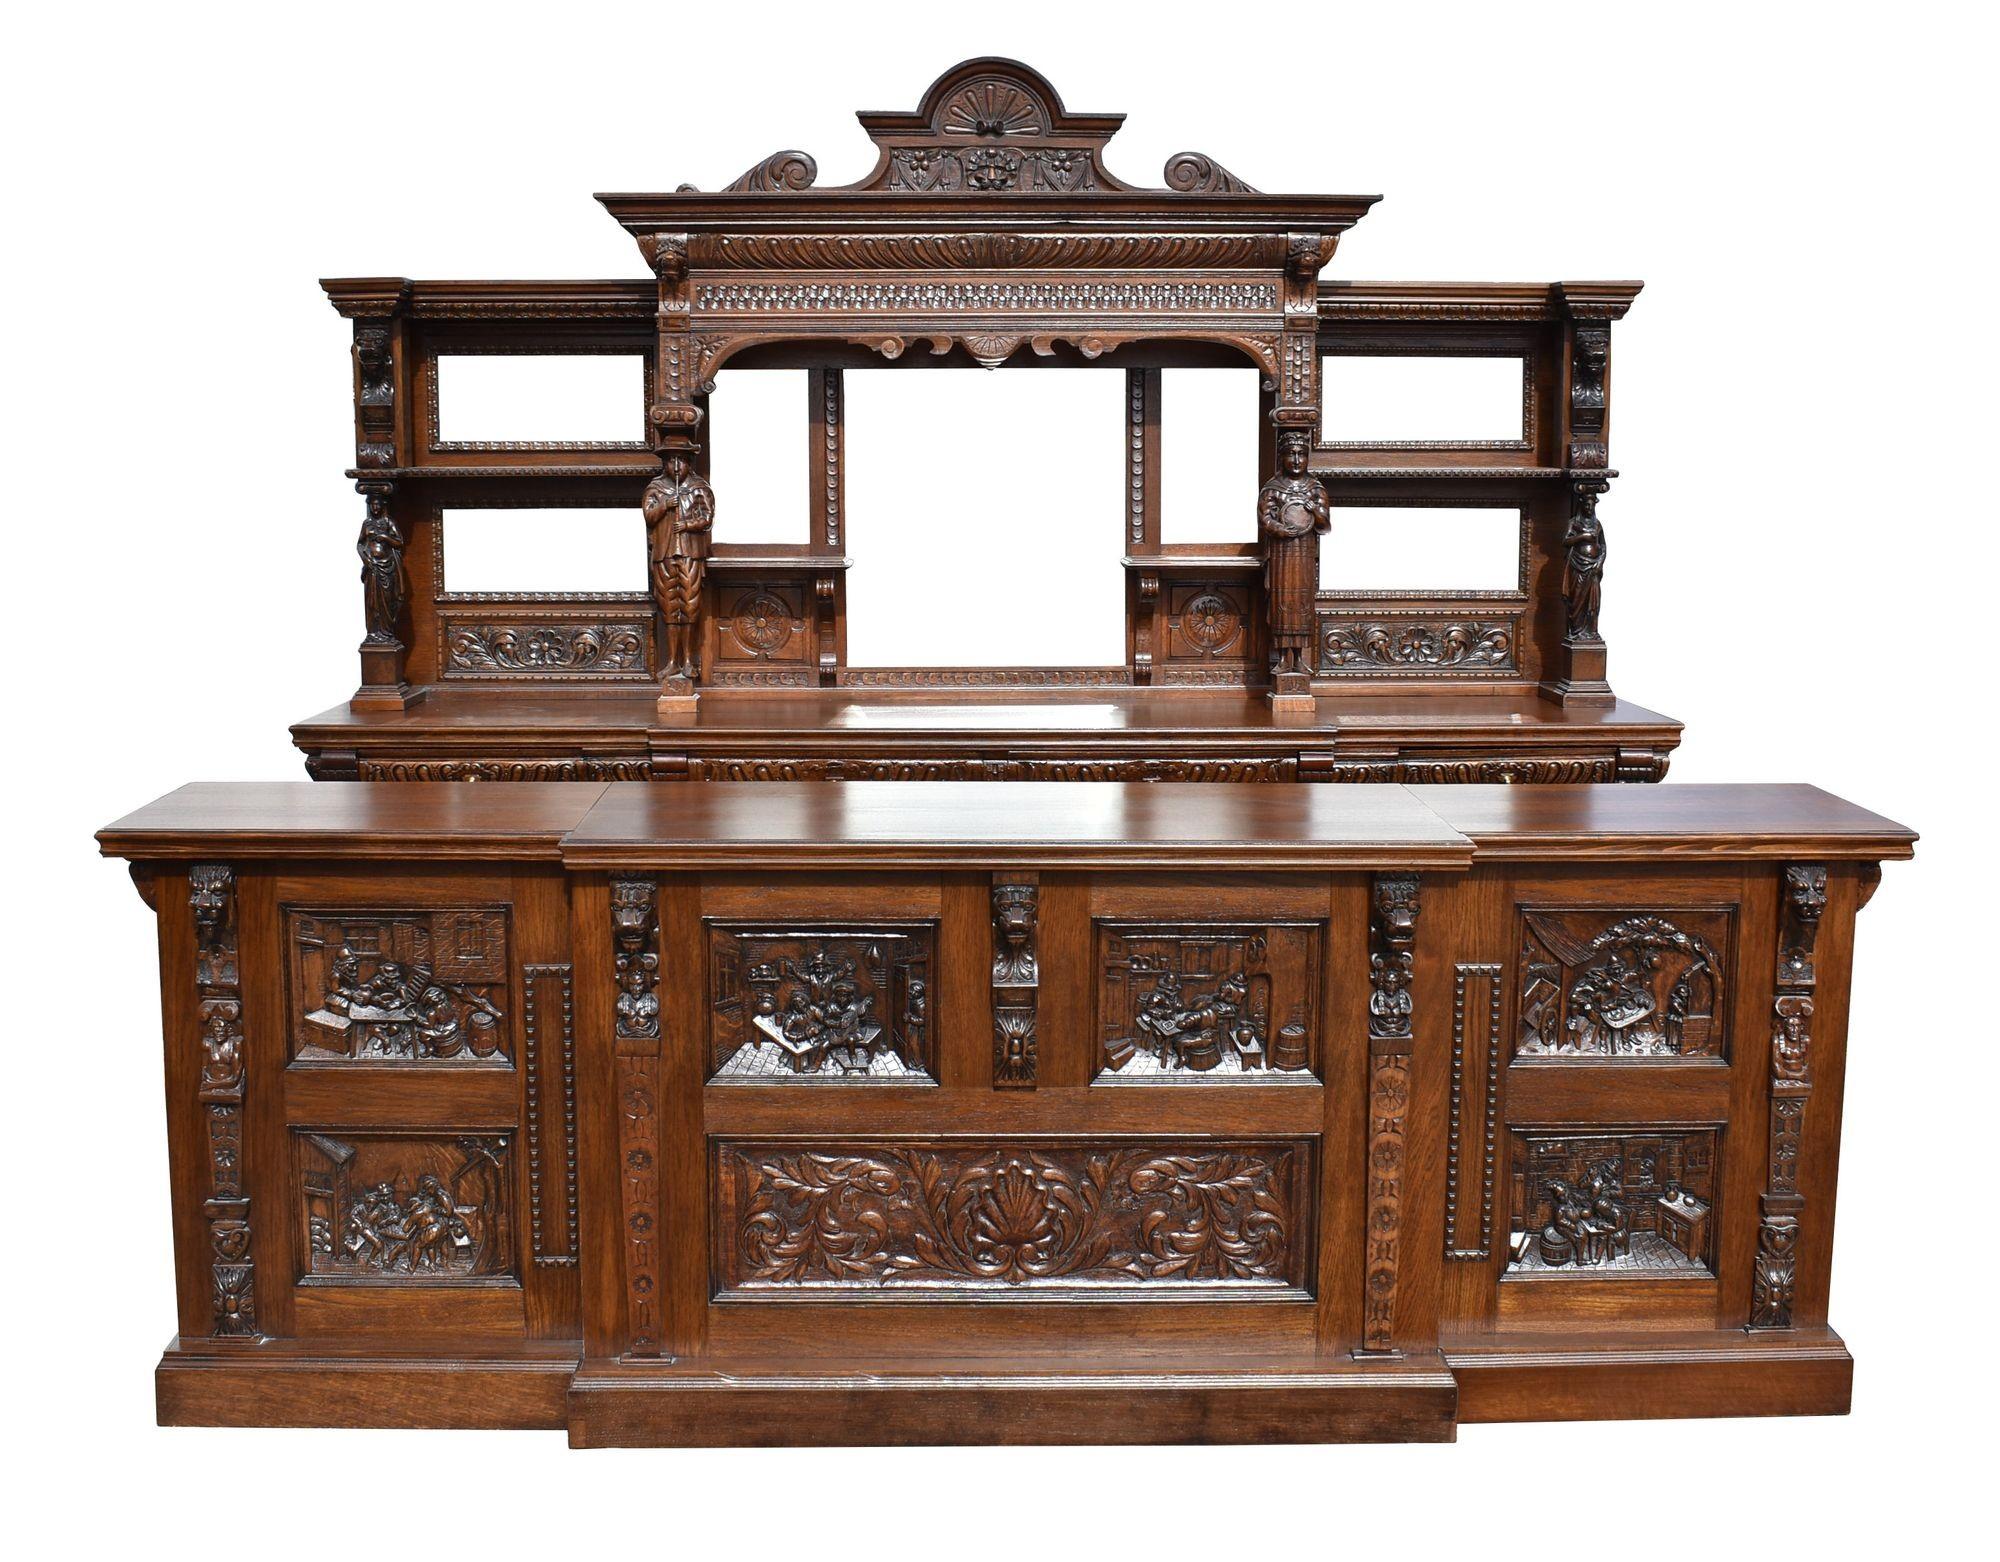 For sale is a good quality Victorian carved oak front and back bar, having an ornate carved lion pediment, with a mirror back below with carved figure supports, flanked by a wing on either side, each with intricately hand carved panels and